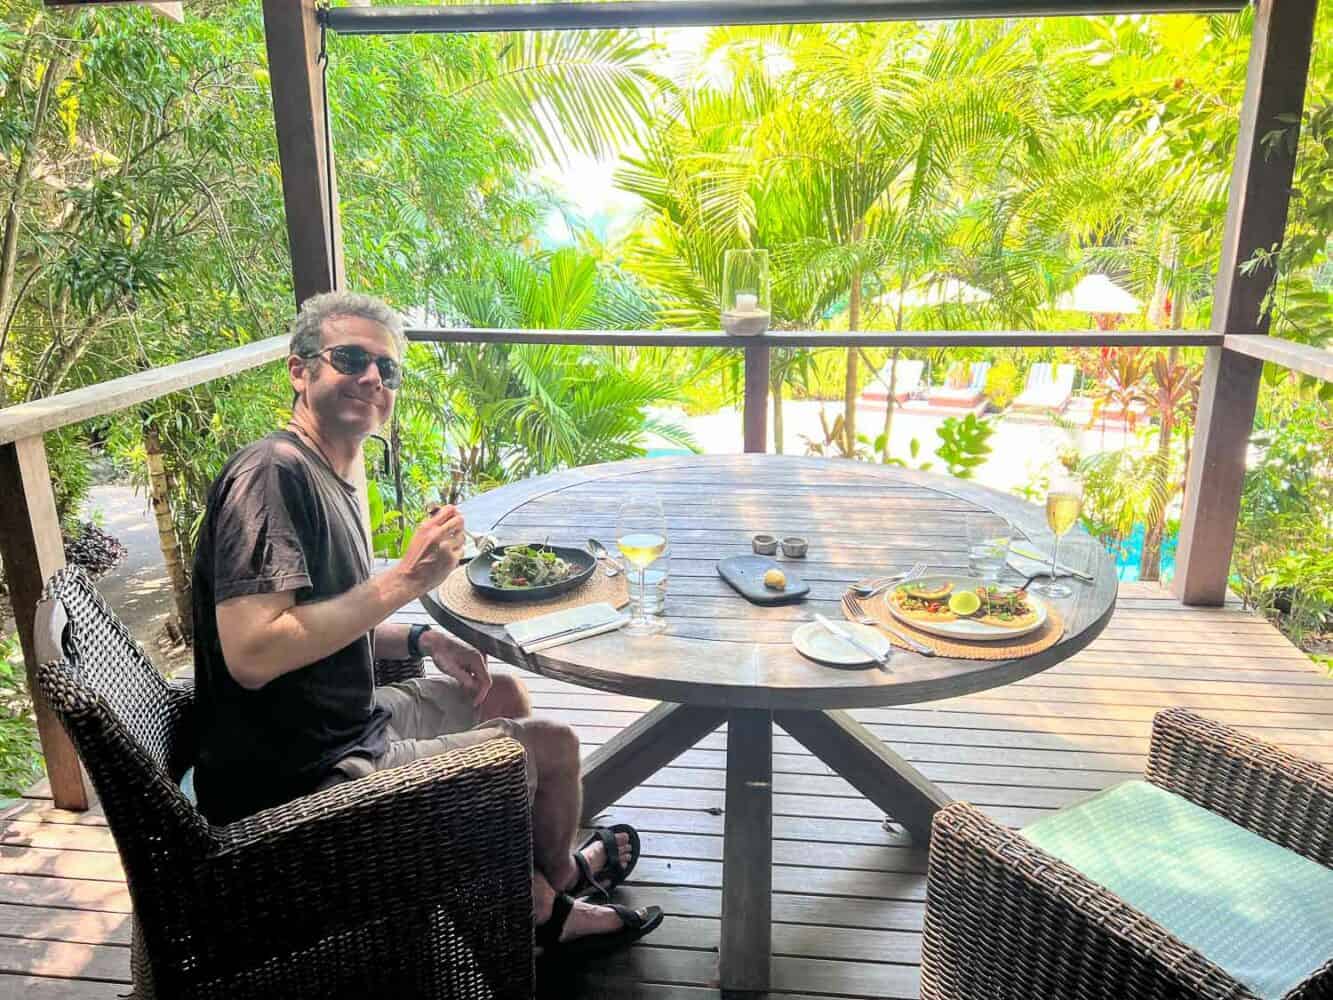 Simon enjoying a meal in the private dining area at Bedarra Island Resort restaurant, Queensland, Australia 